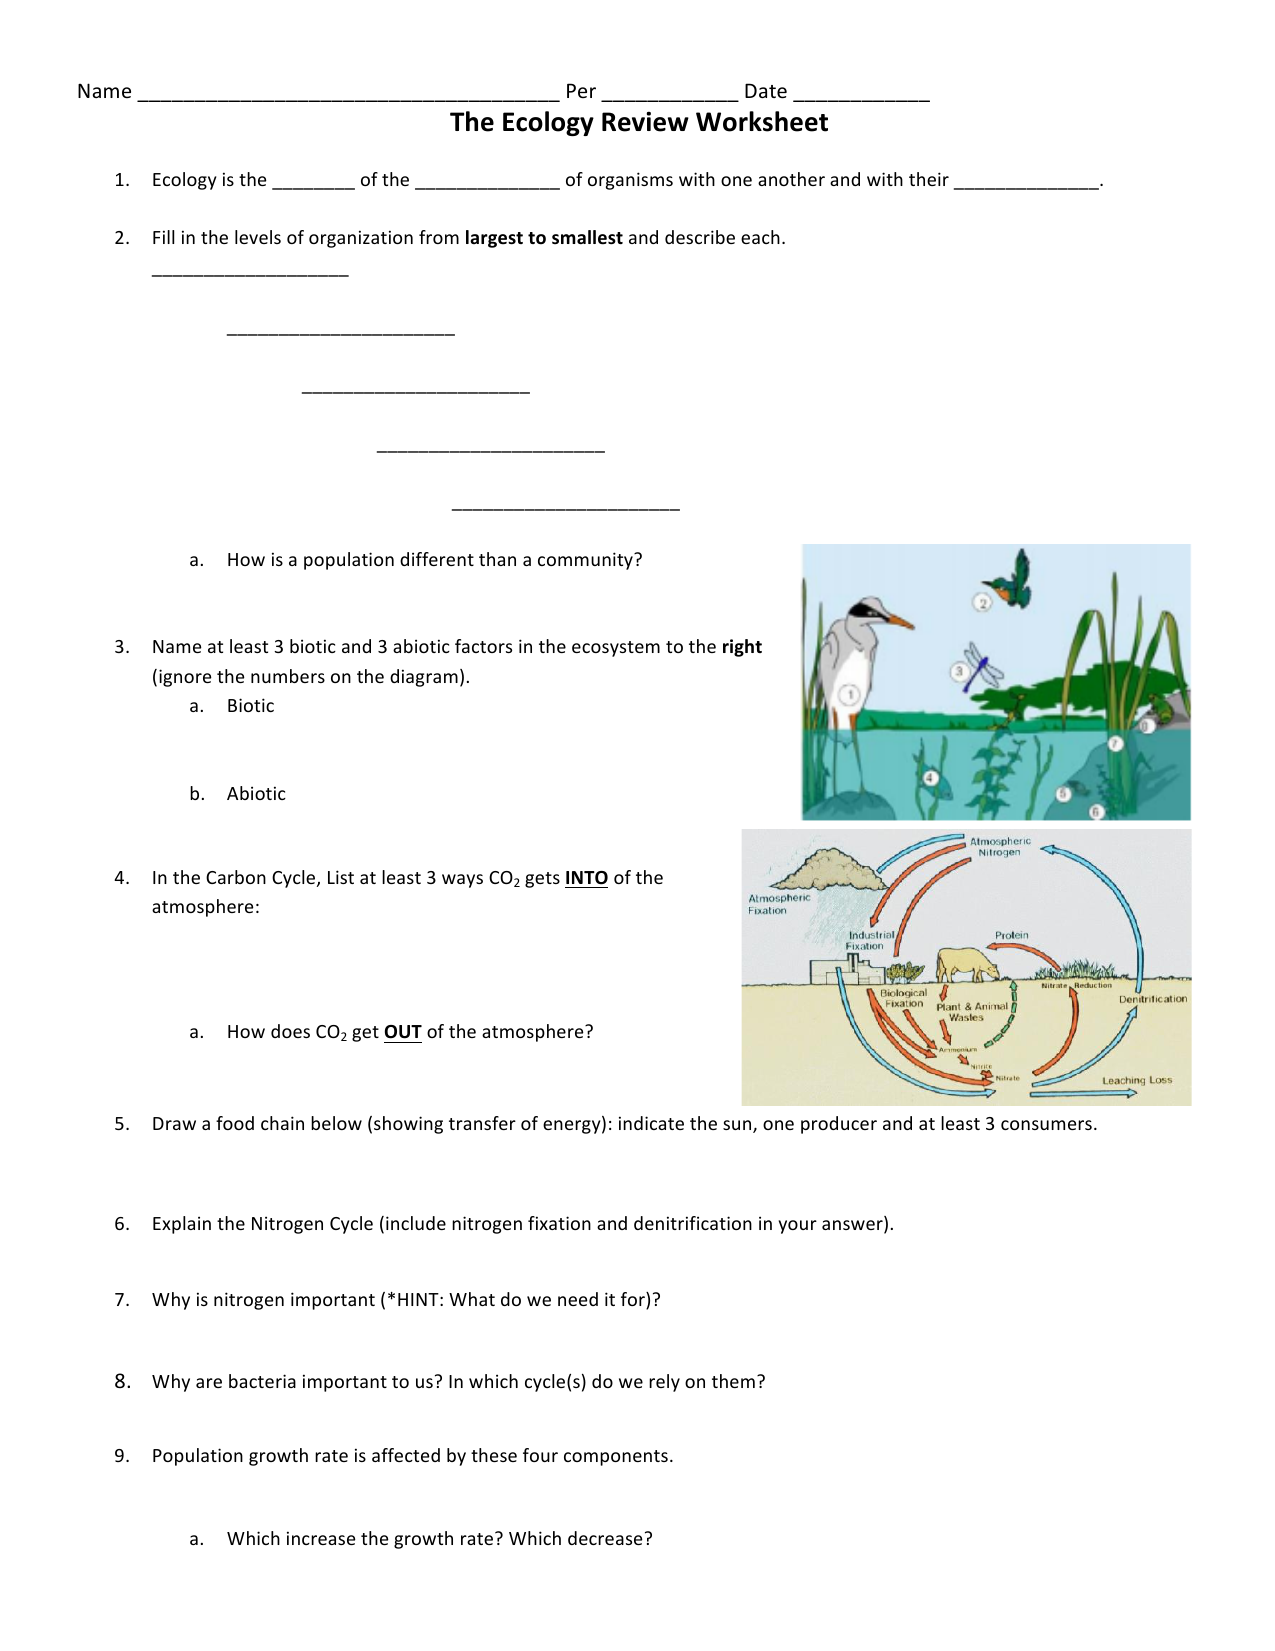 The Ecology Review Worksheet With Regard To Ecology Review Worksheet 1